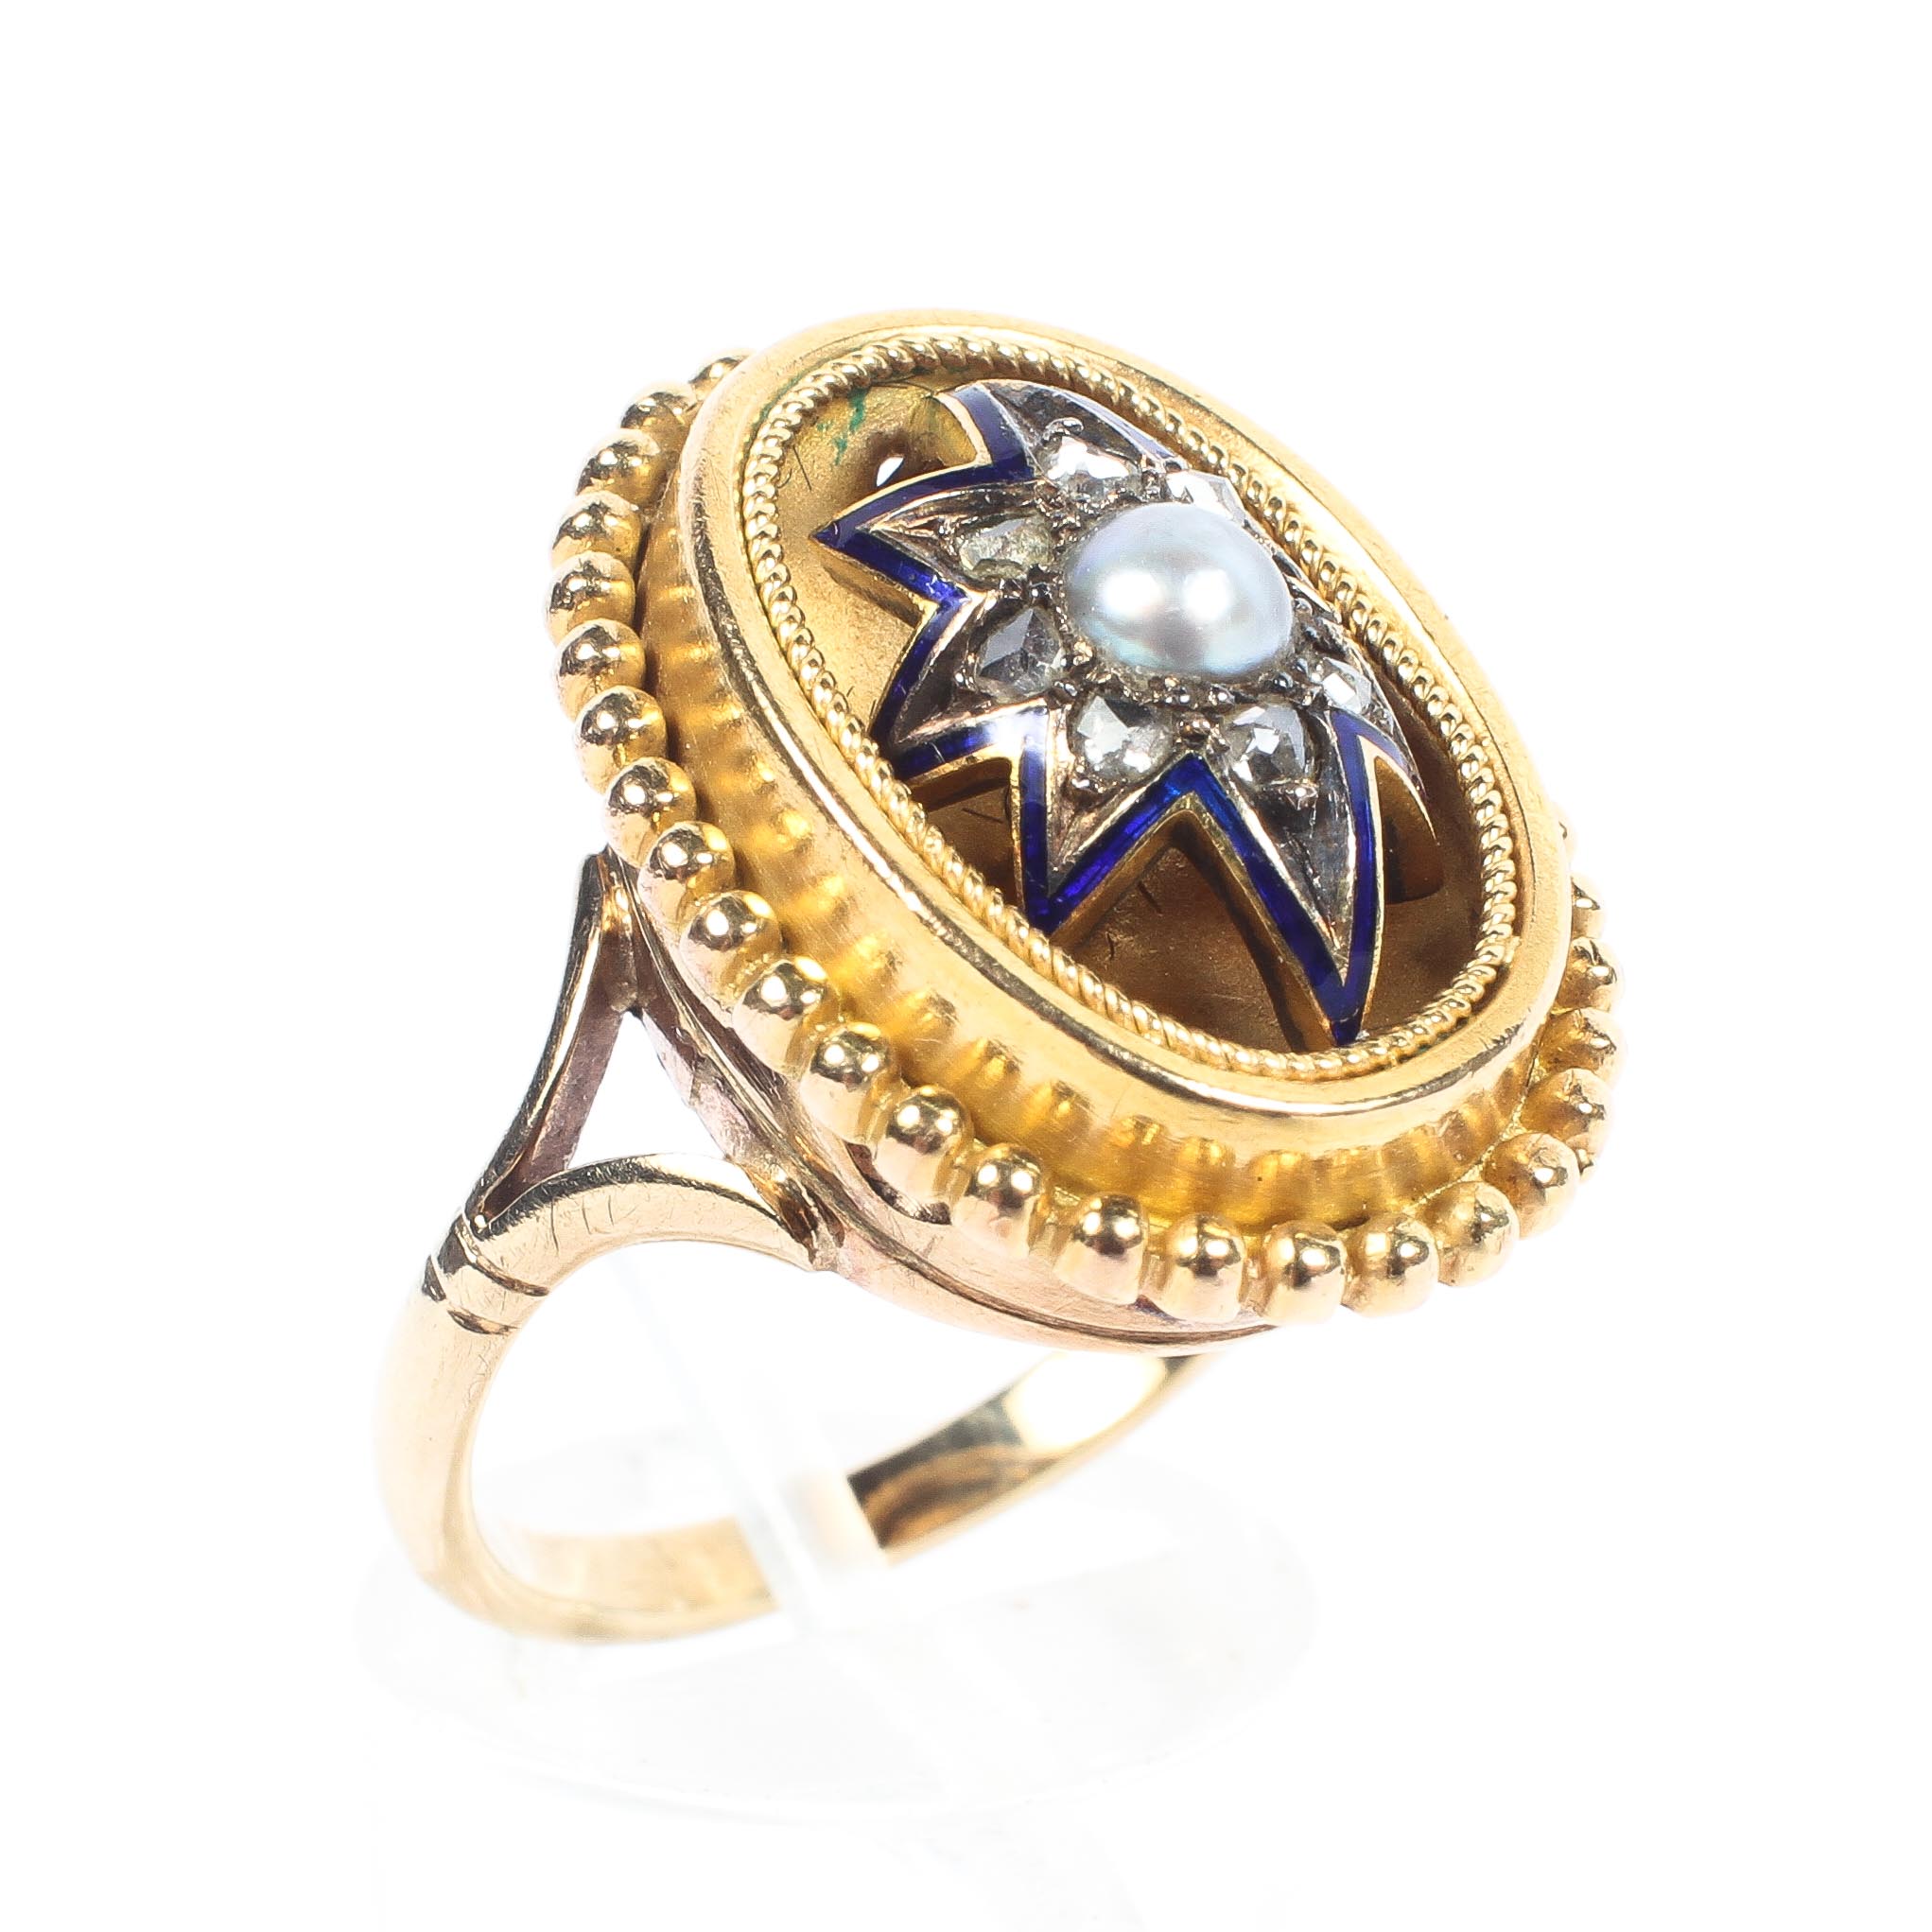 A Victorian 9ct gold ring, central pearl with a surround of rose cut diamonds and enamel detail.